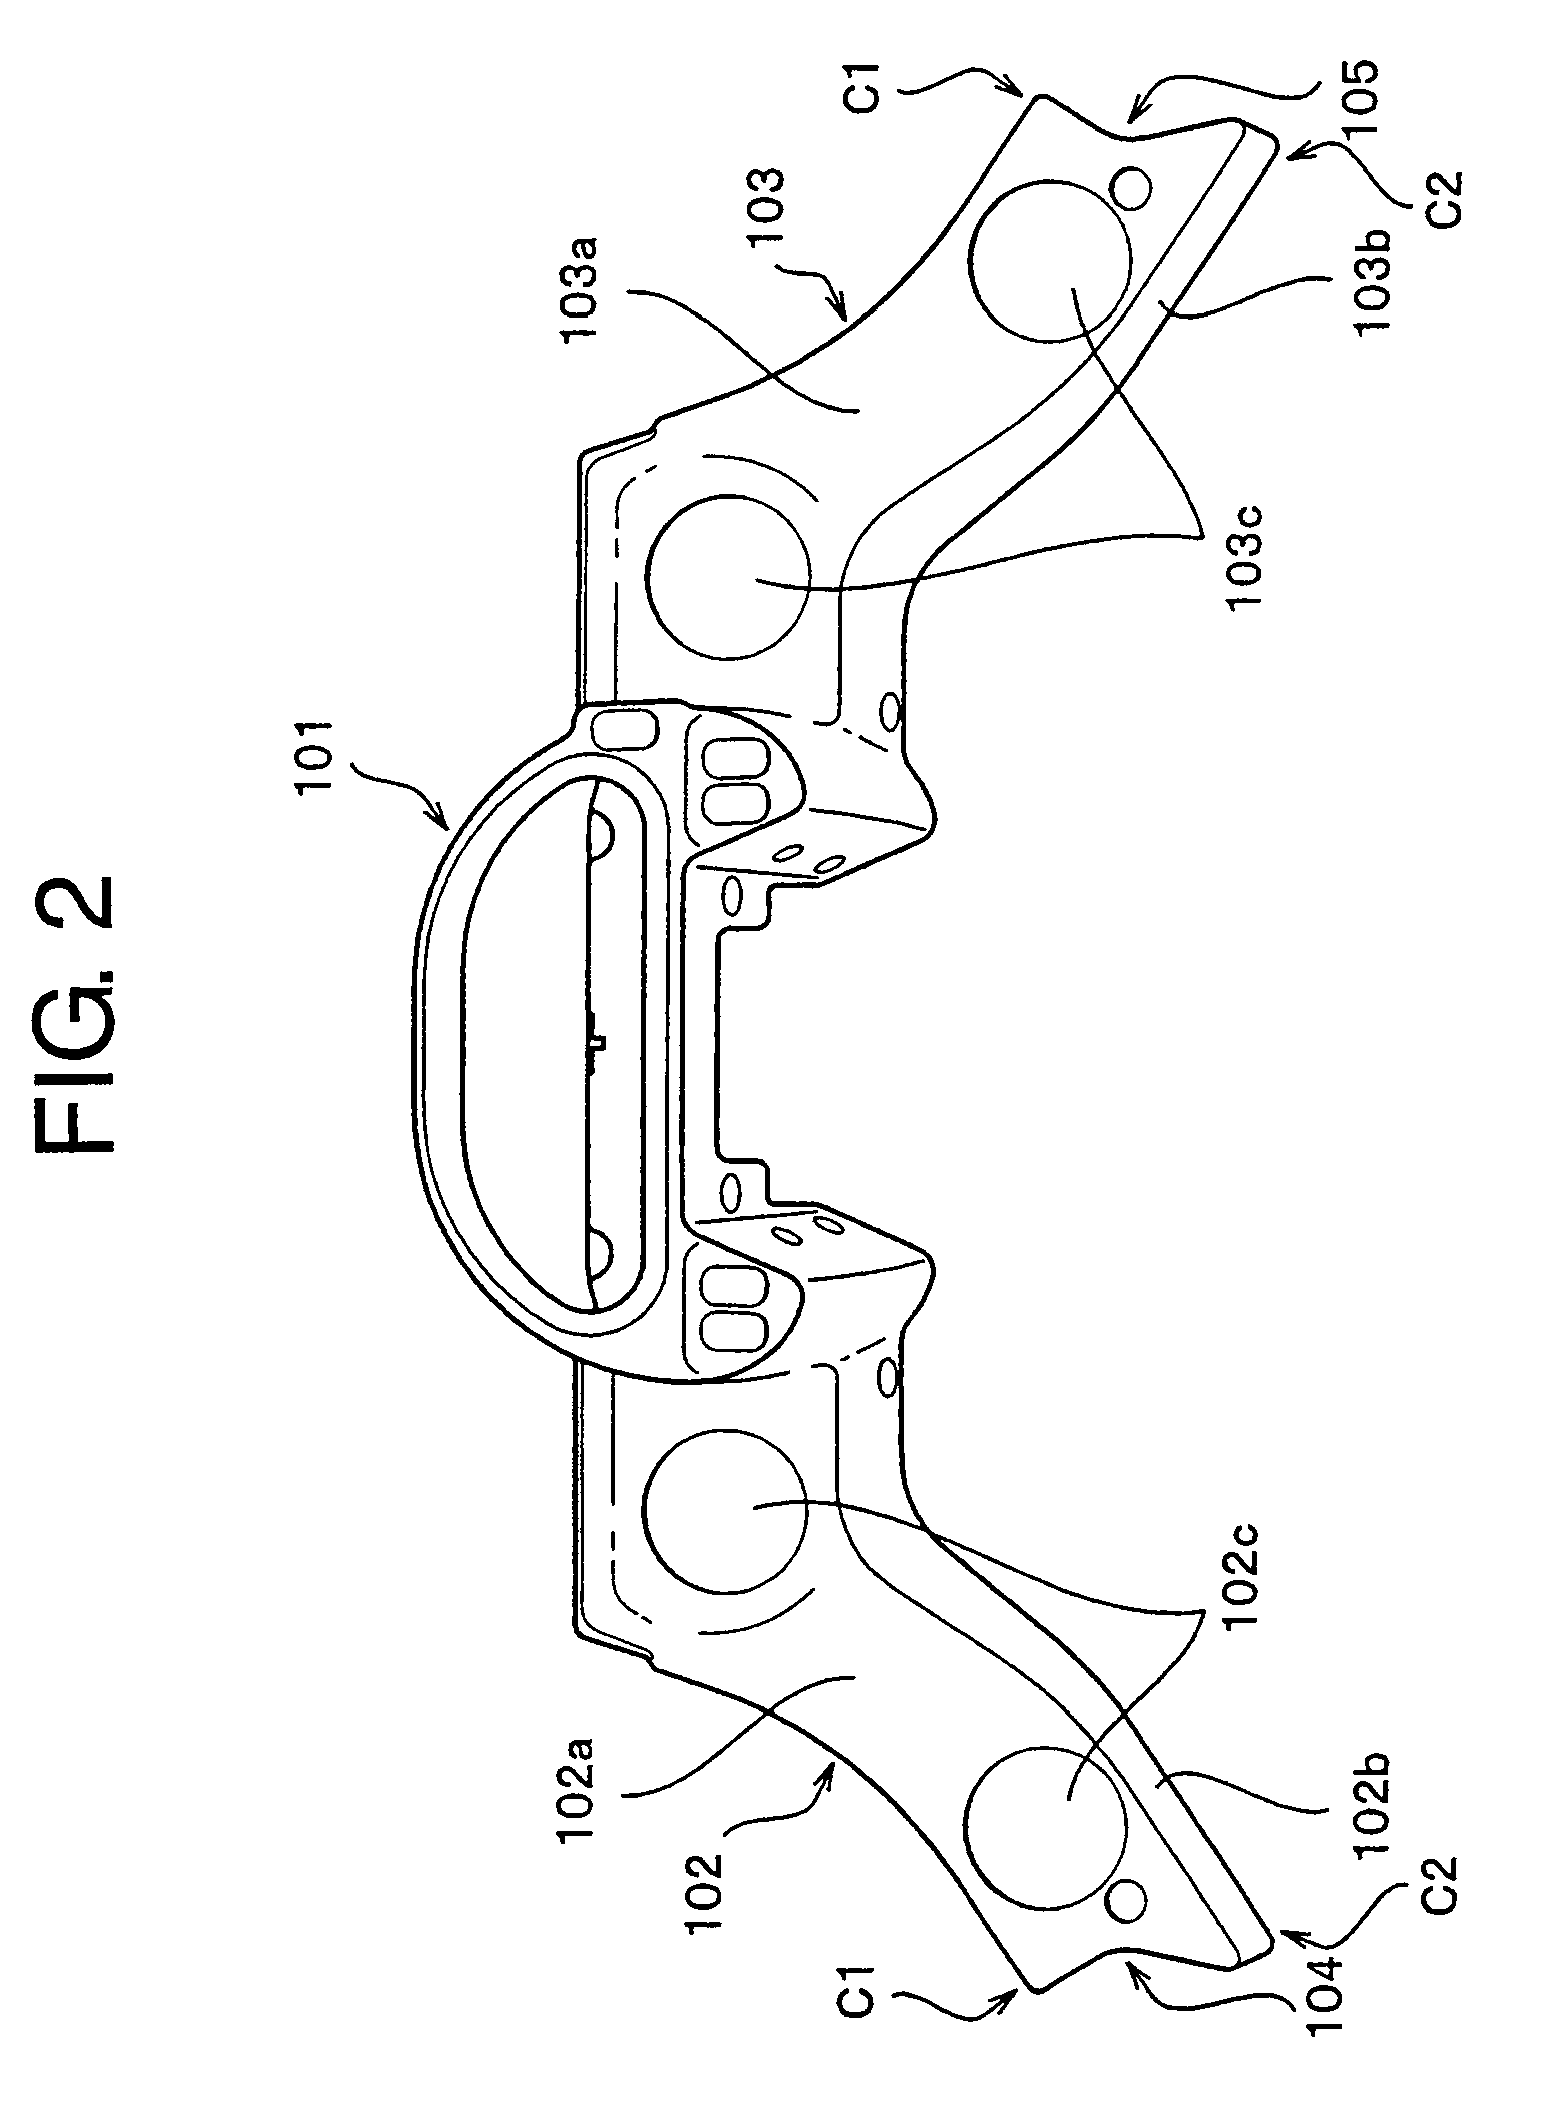 Interior trim member of work vehicle and method of manufacturing the same